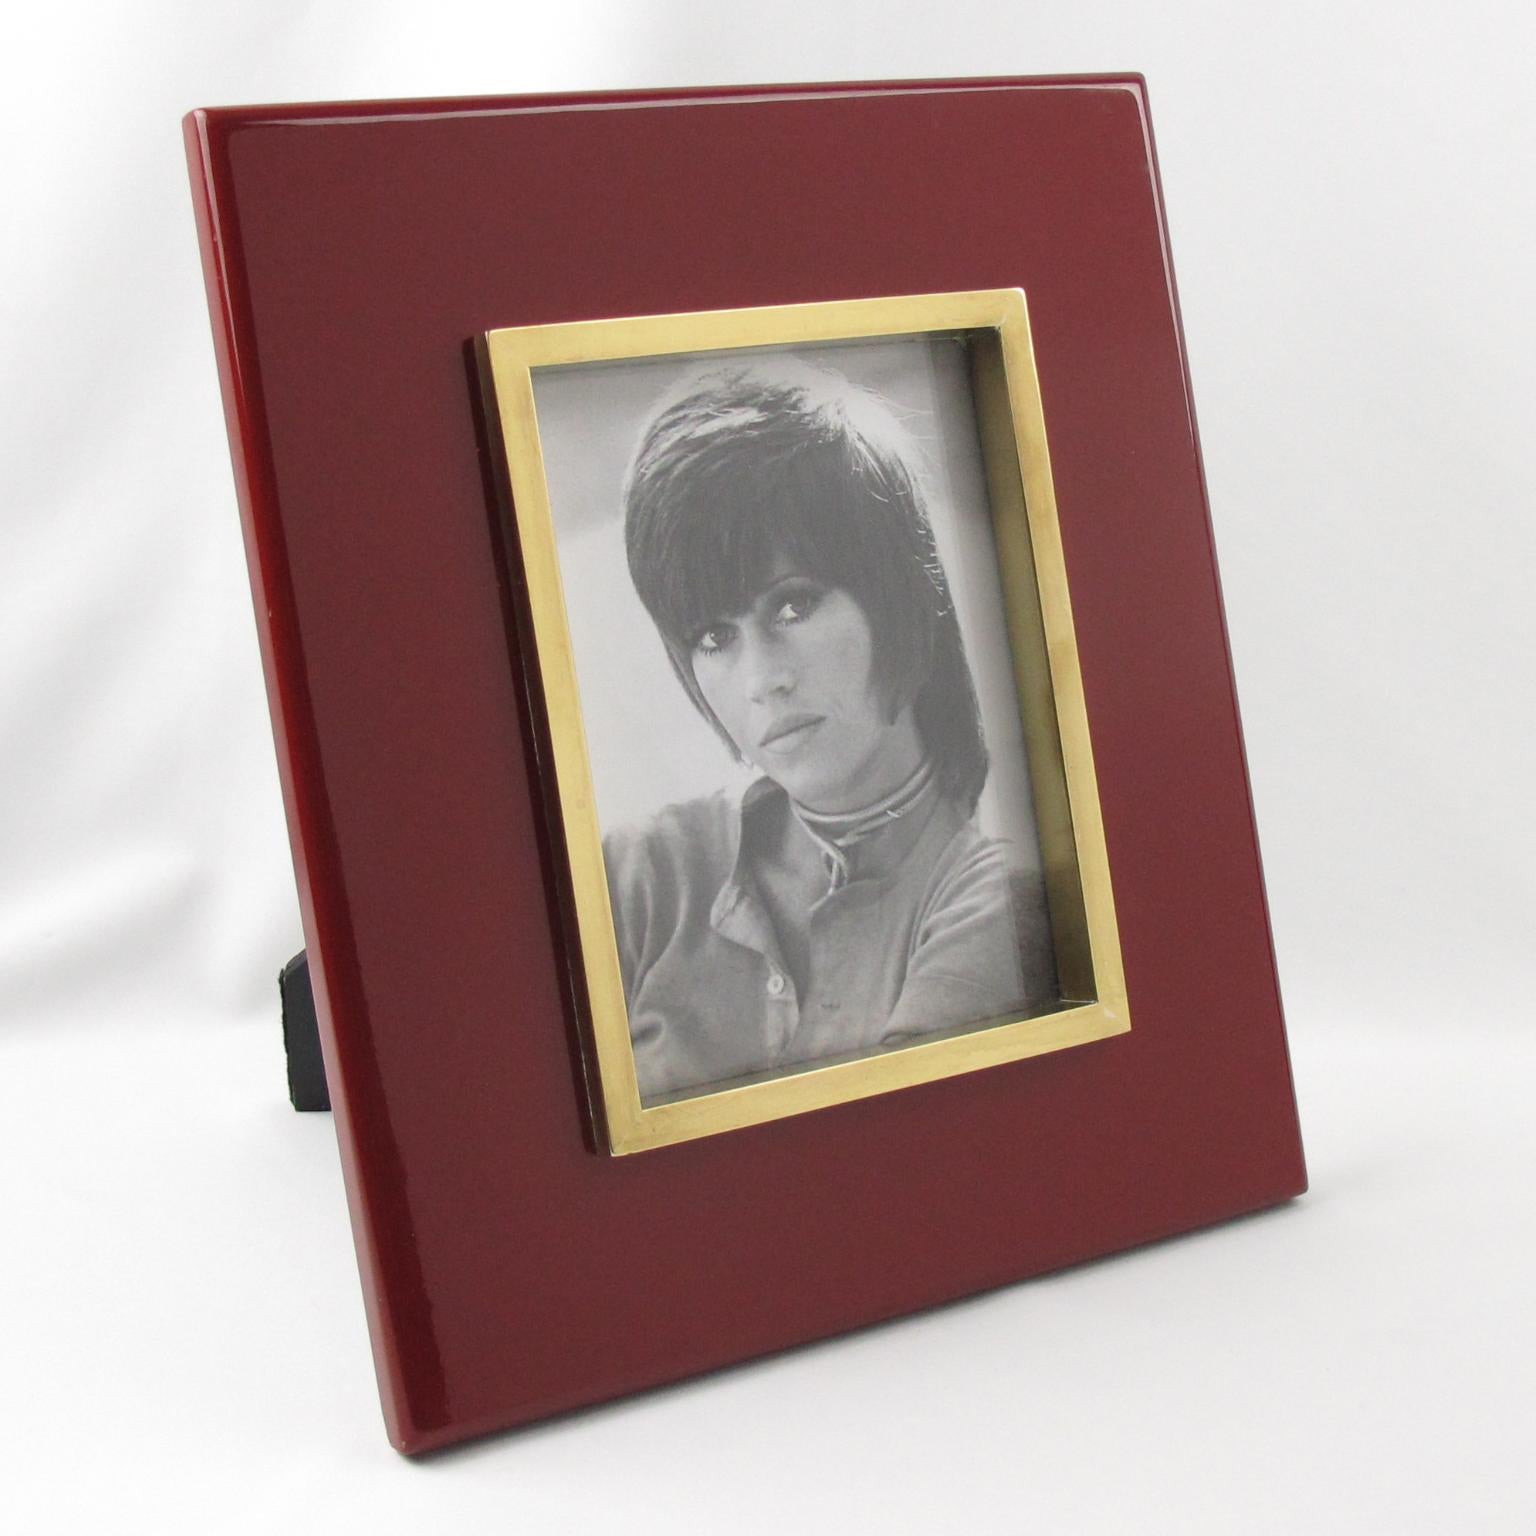 French designer Jean Claude Mahey designed and crafted this luxury modernist picture photo frame in the 1970s. The decorative piece features an elegant Oxblood colored lacquered wood with polished gilded brass framing around the picture view. The